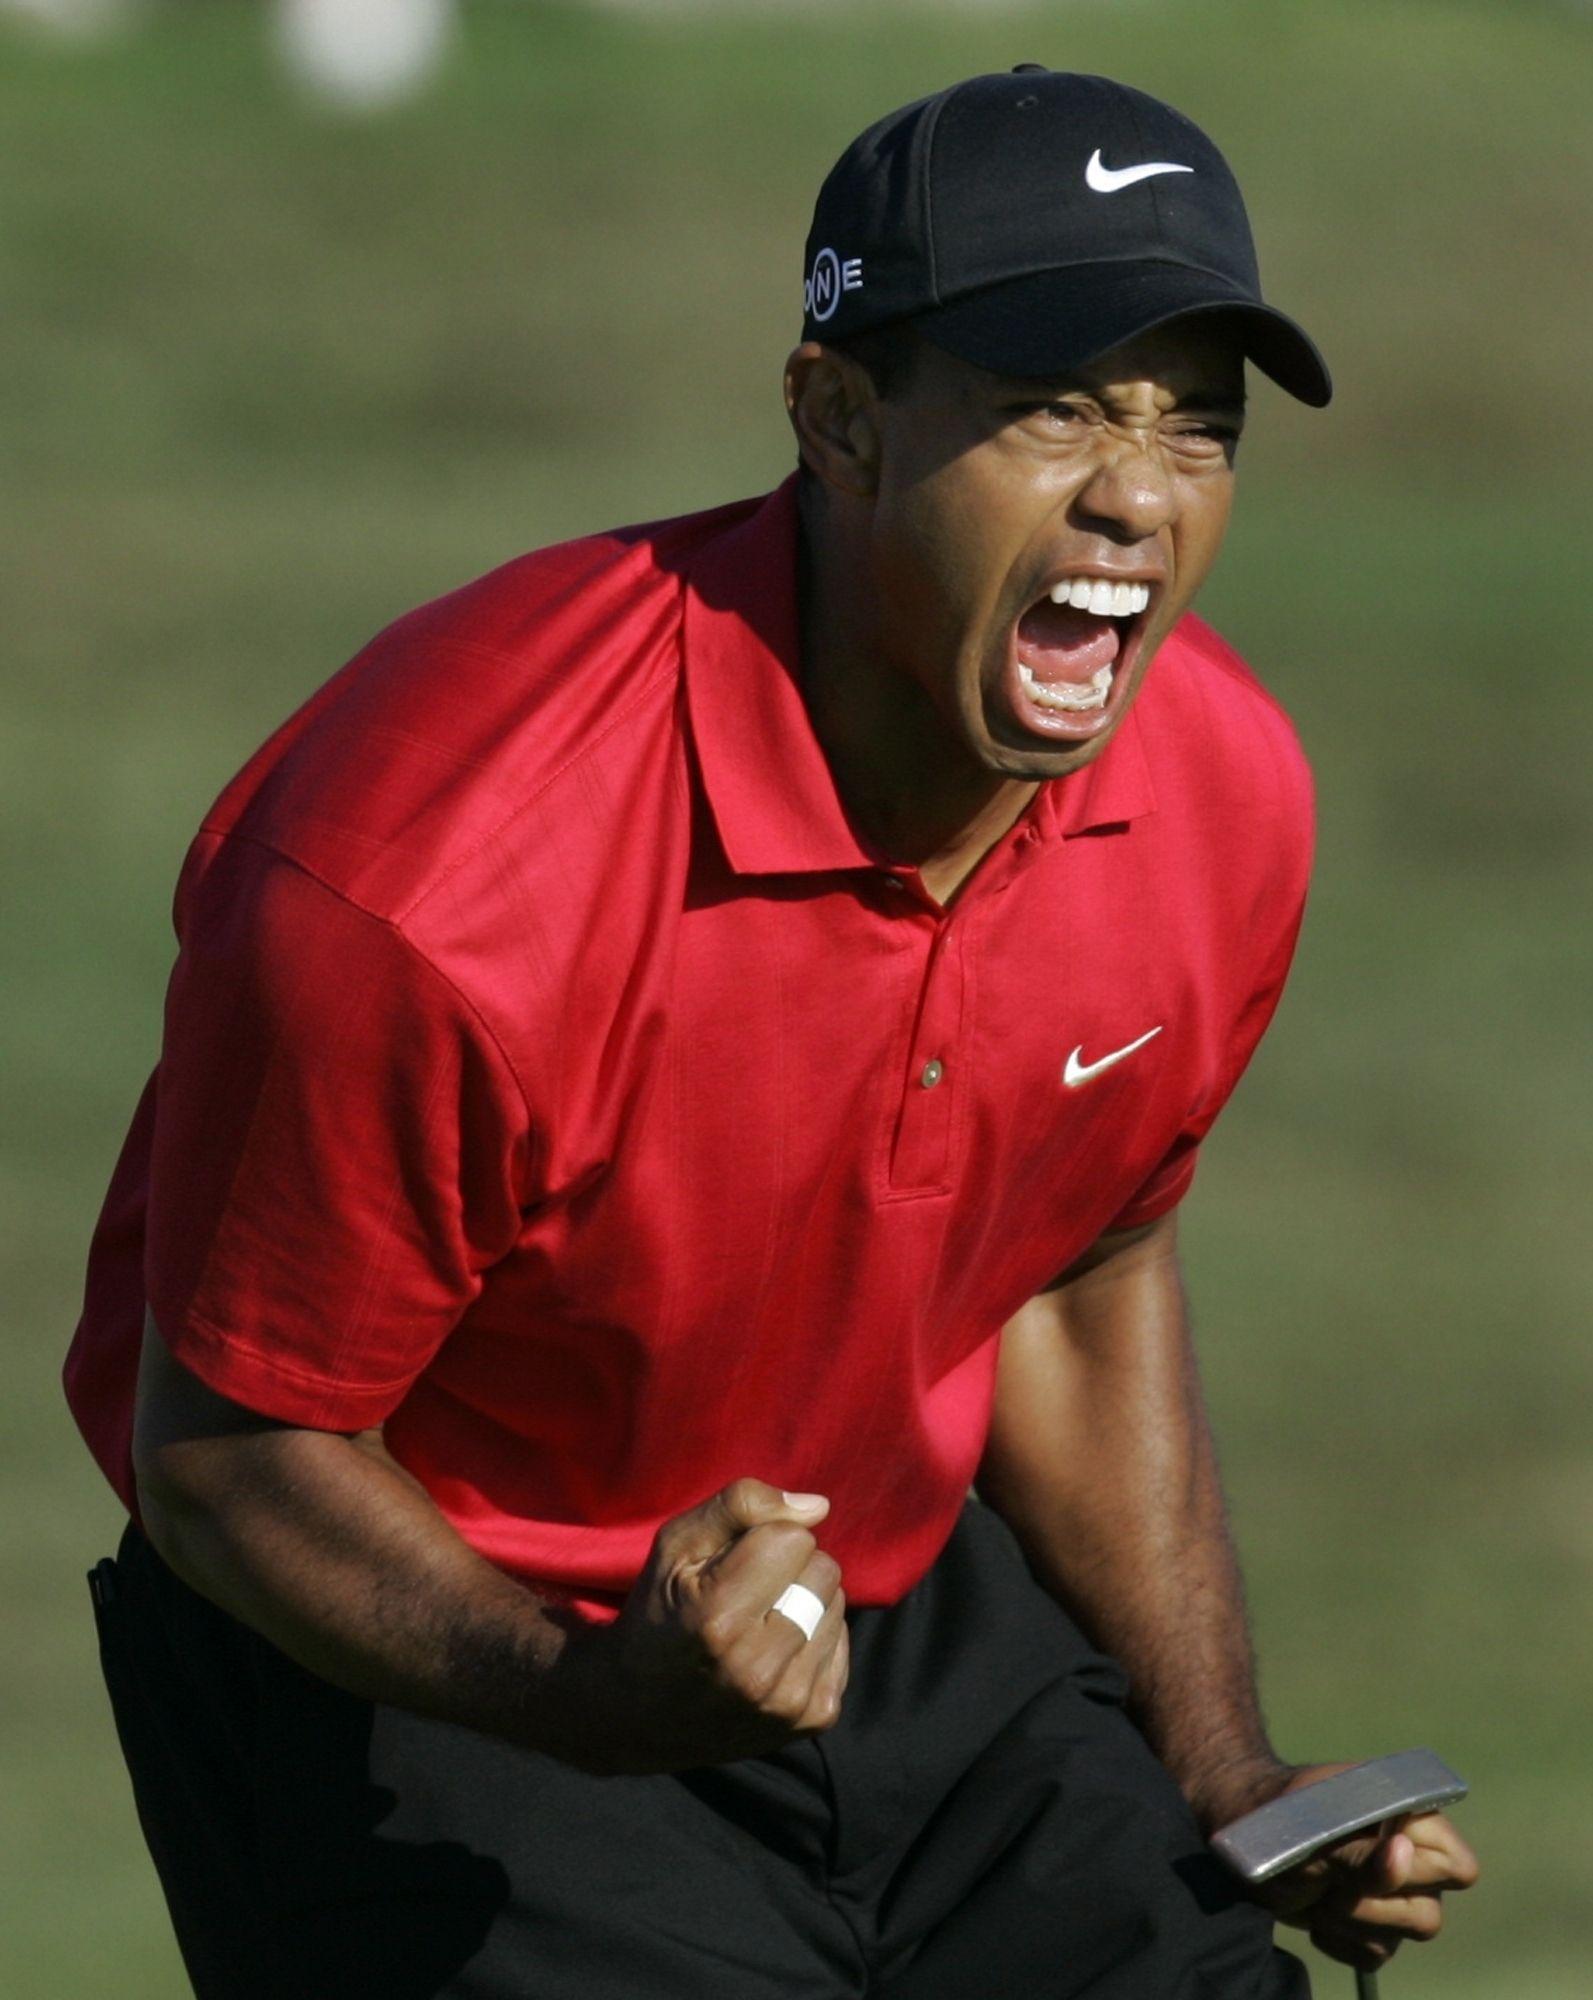 Tiger Woods Iphone Wallpapers Top Free Tiger Woods Iphone Backgrounds Wallpaperaccess